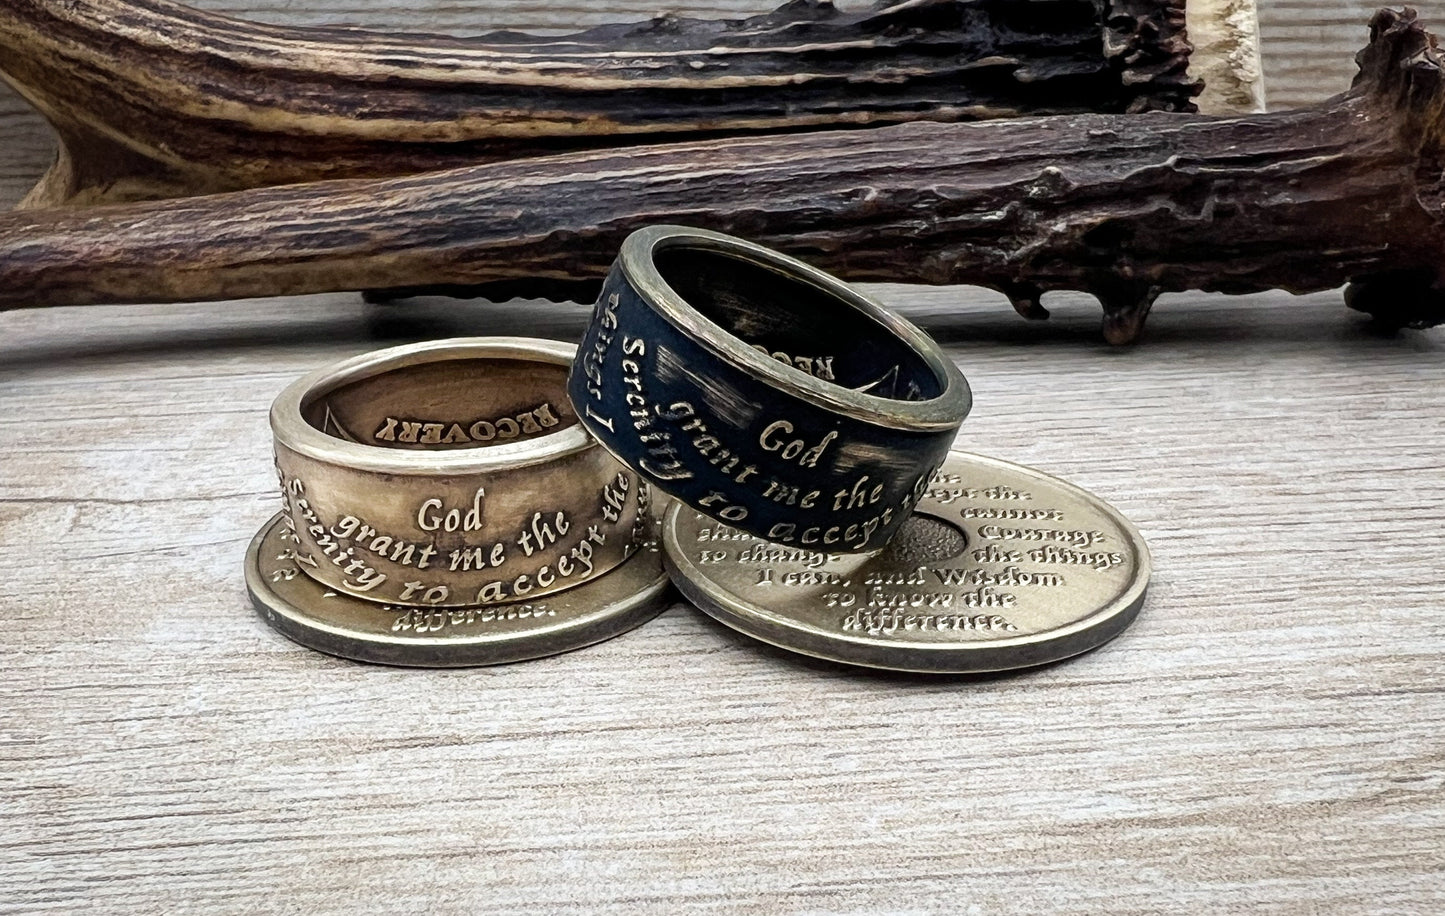 Serenity Prayer AA Ring, Sobriety, AA anniversary, Alcoholics Anonymous, Coin Ring, AA Coin, Coin Rings, Recovery Gift 5-14